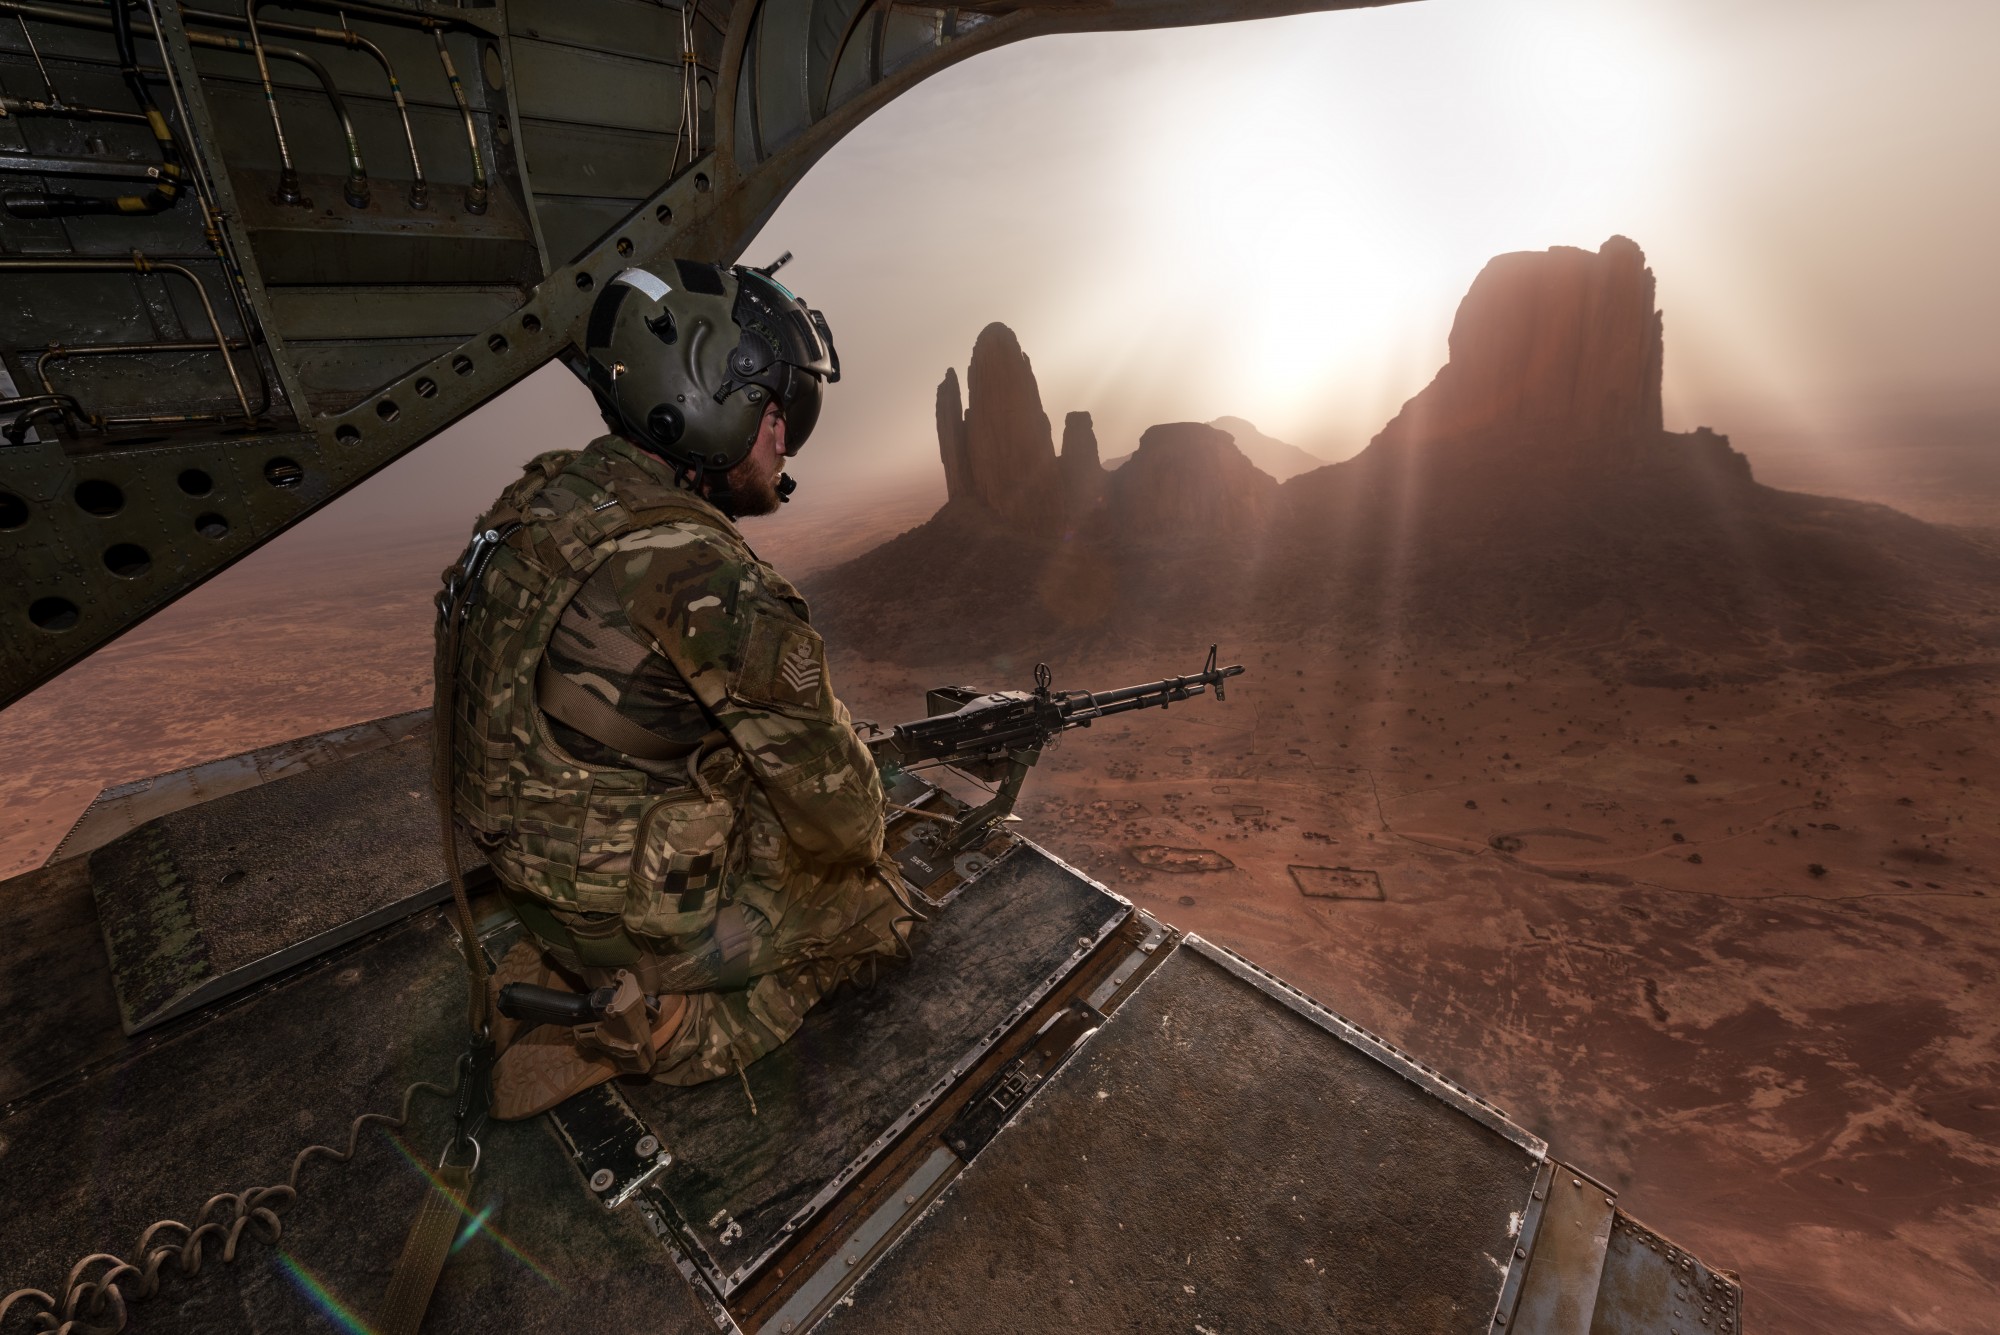 Inzpire Limited has signed a contract with the UK Ministry of Defence’s (MOD) Defence and Security Accelerator (DASA) to develop a prototype mixed reality deployable simulator.